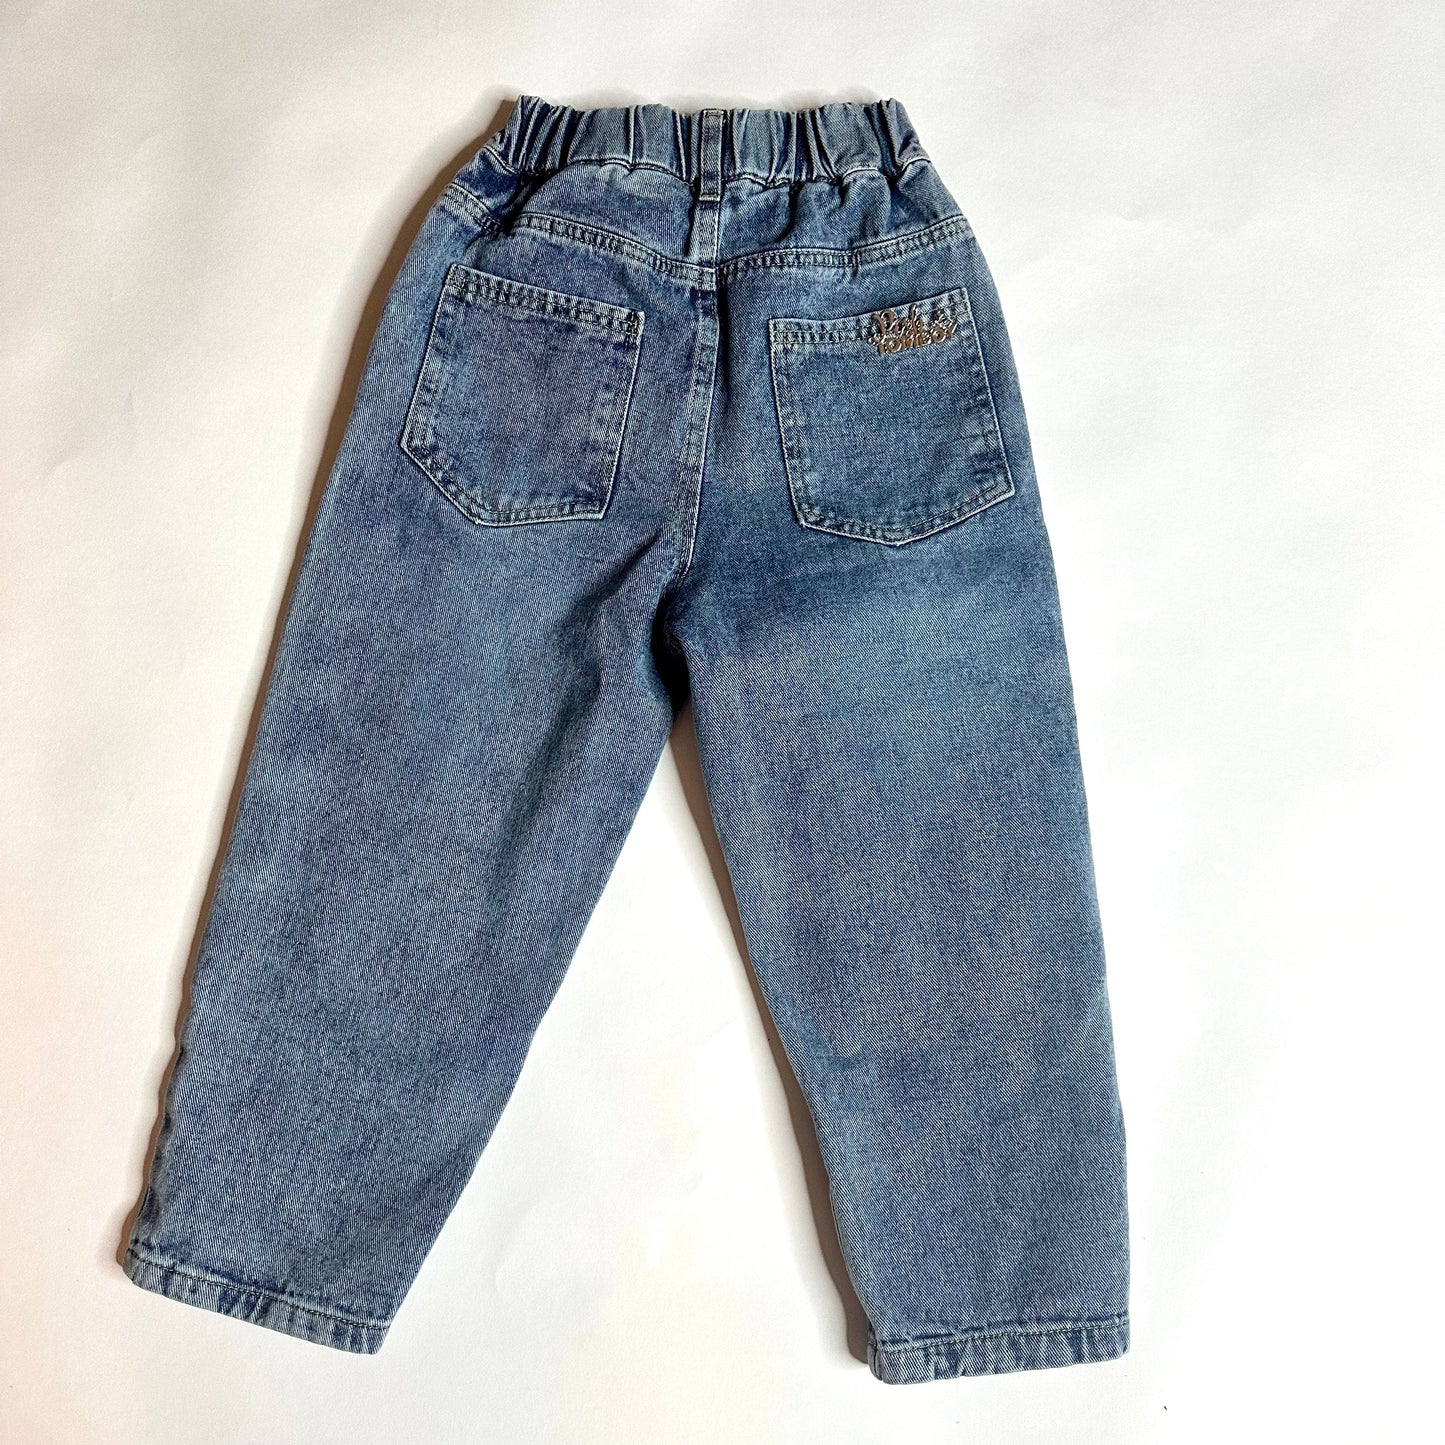 Posh Tomboy jeans Blue Cheese… ‘Cause It’s Funky Distressed Denim Pants